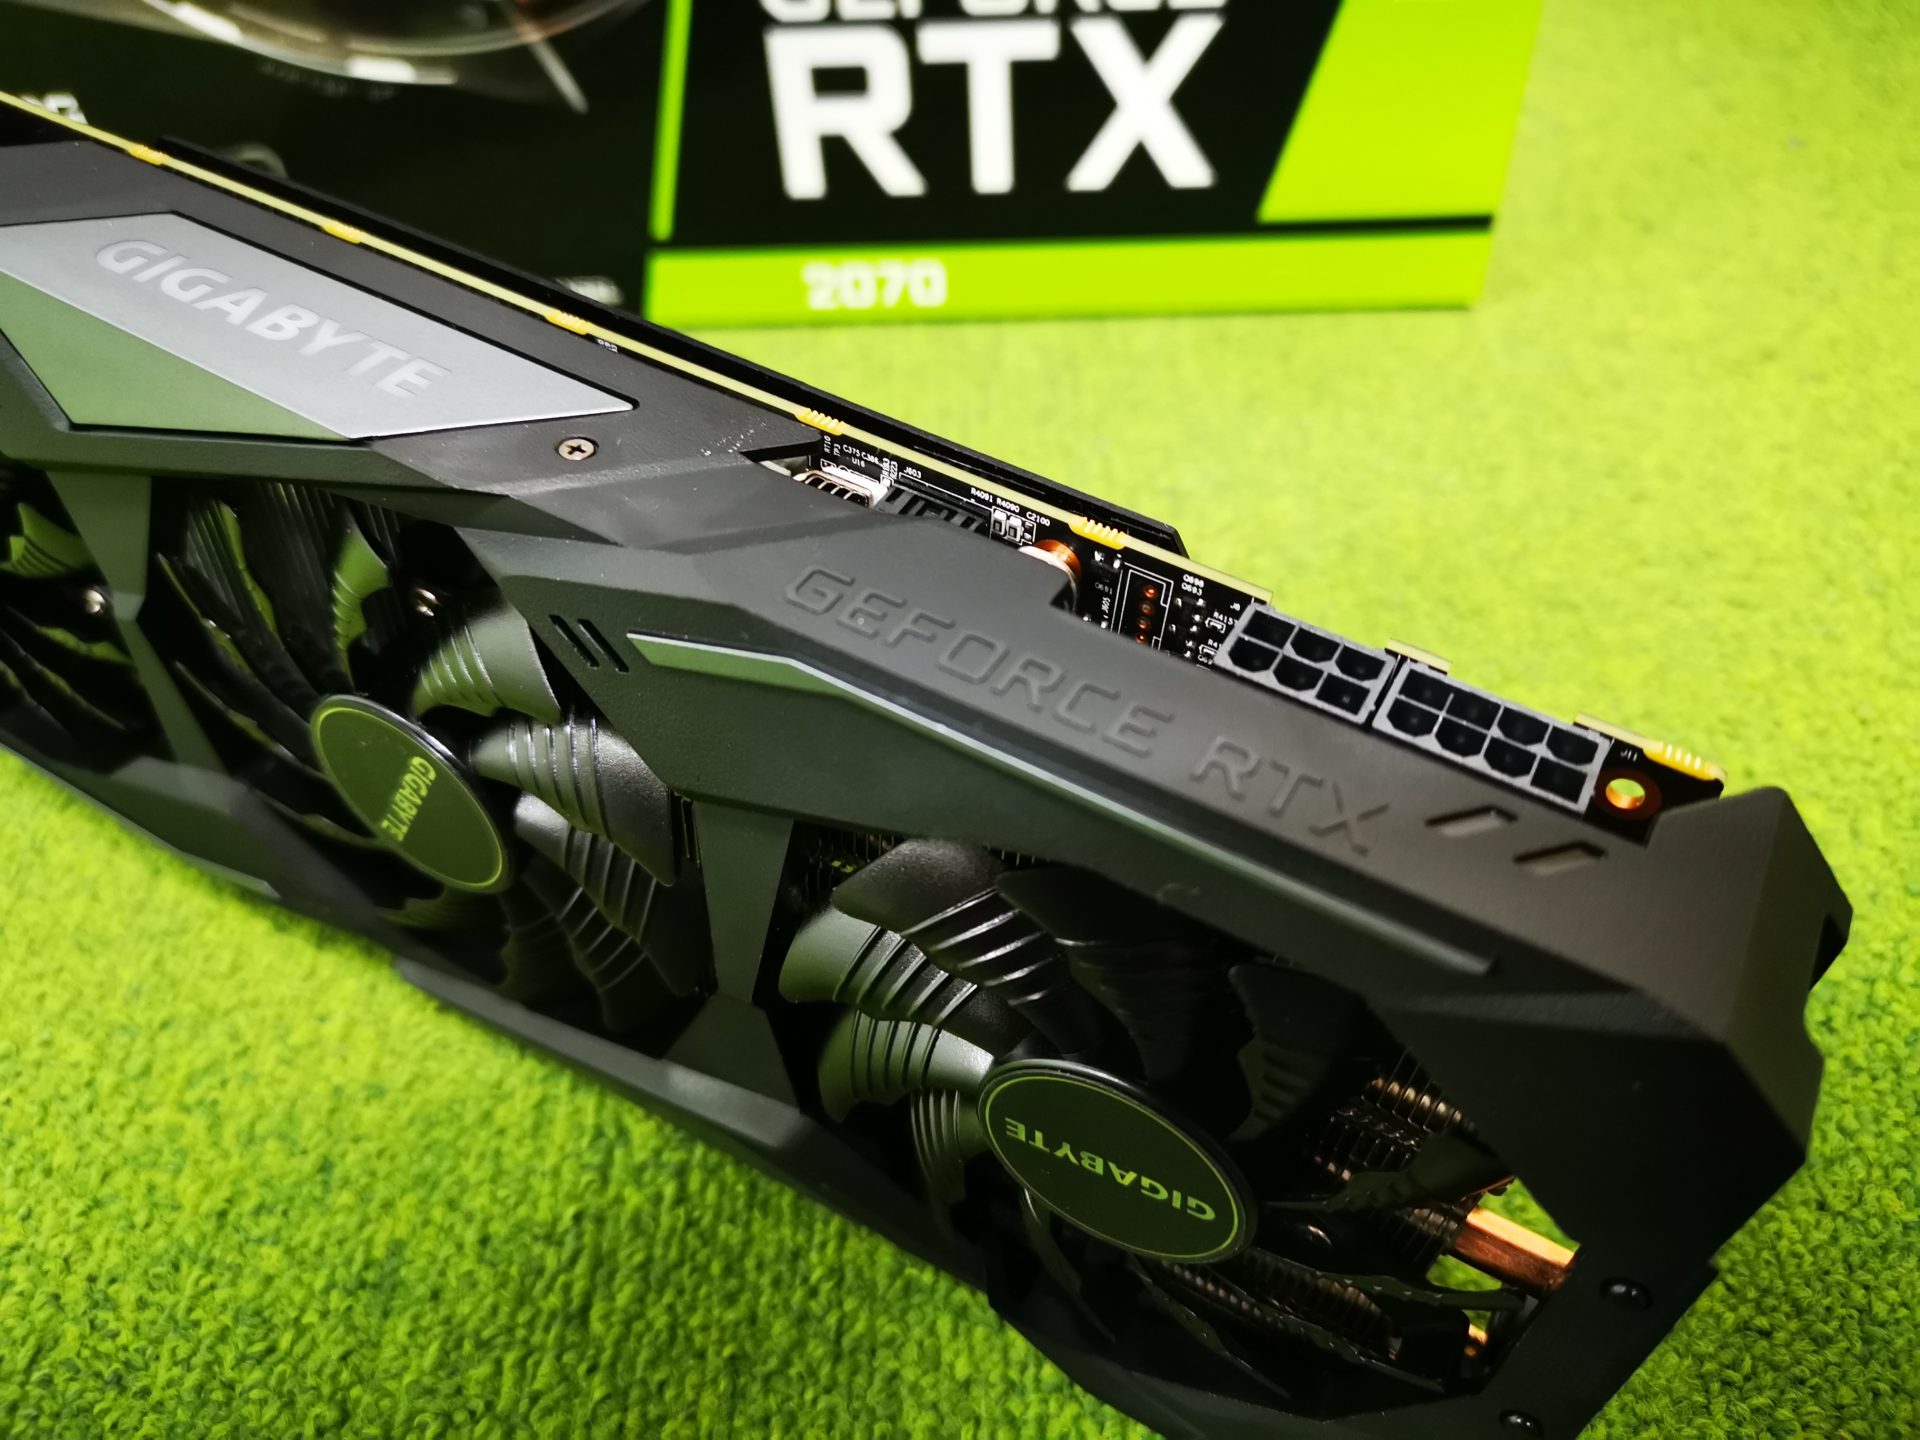 Specification GeForce RTX 2070 GAMING 8G